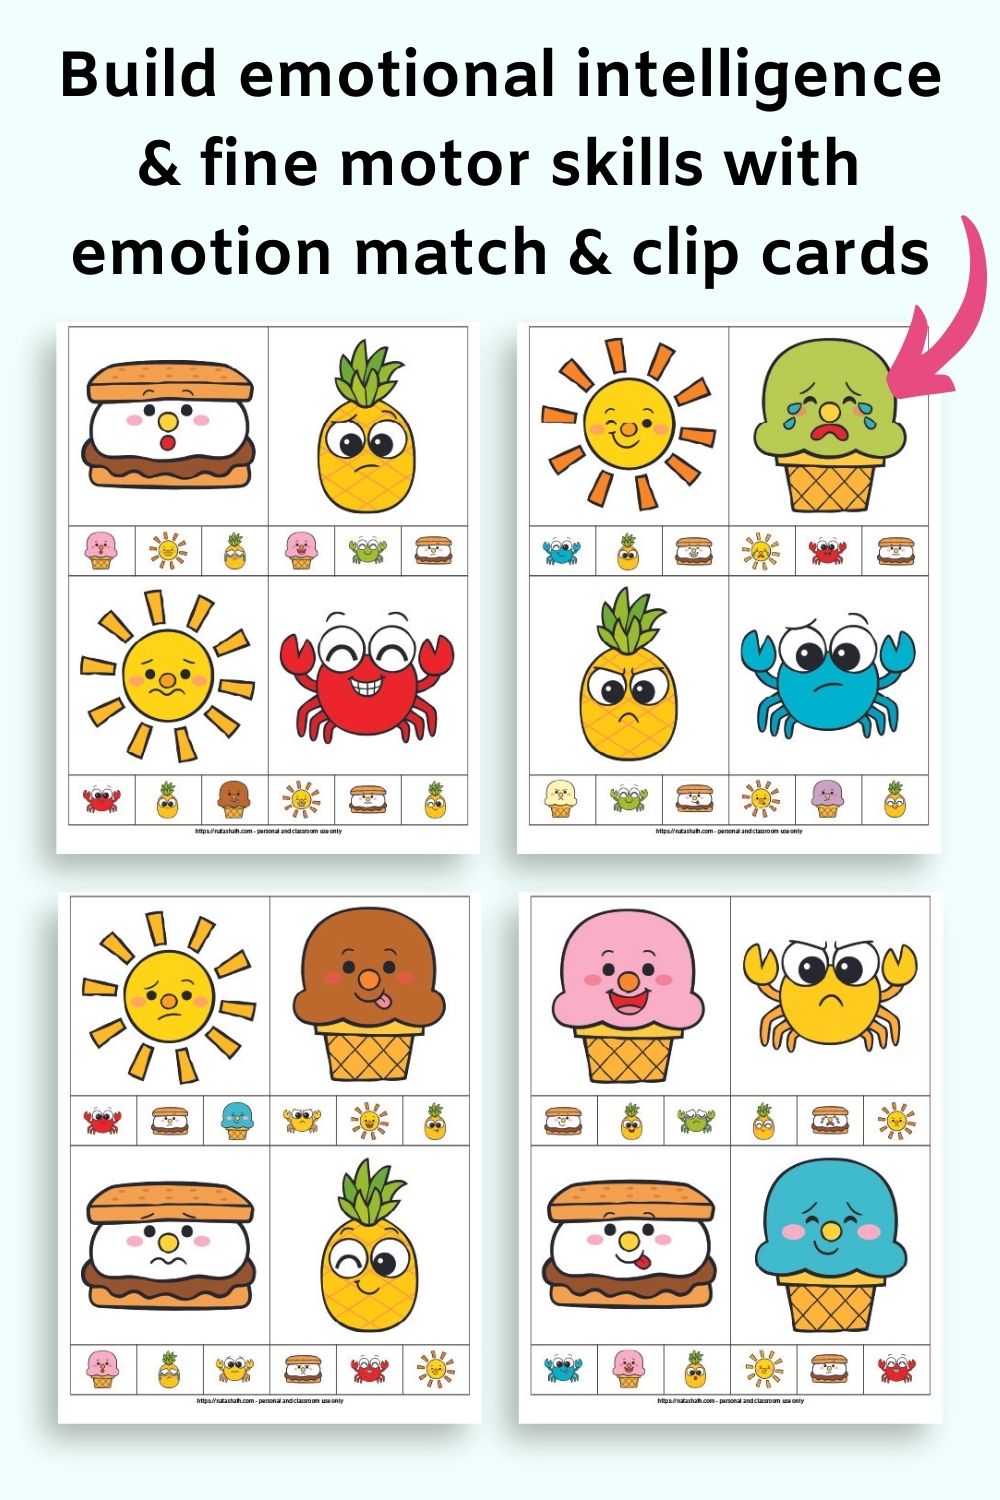 Text "build emotional intelligence and fine motor skills with emotion match & clip cards" with a preview of four pages of emotion match and clip cards with silly summer emojis.